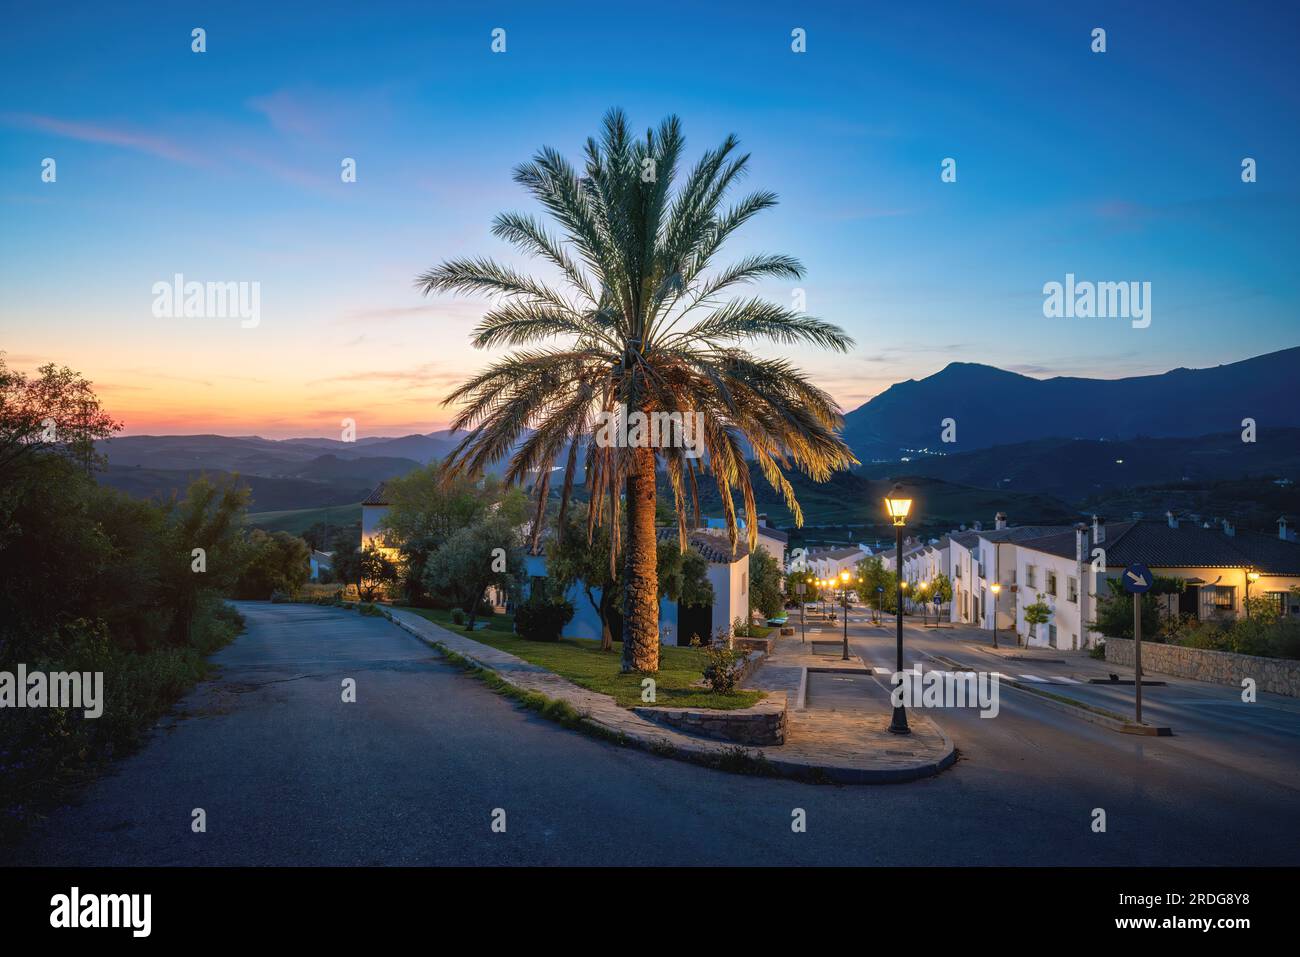 Palm Tree on a street at sunset with Mountains - Zahara de la Sierra, Andalusia, Spain Stock Photo